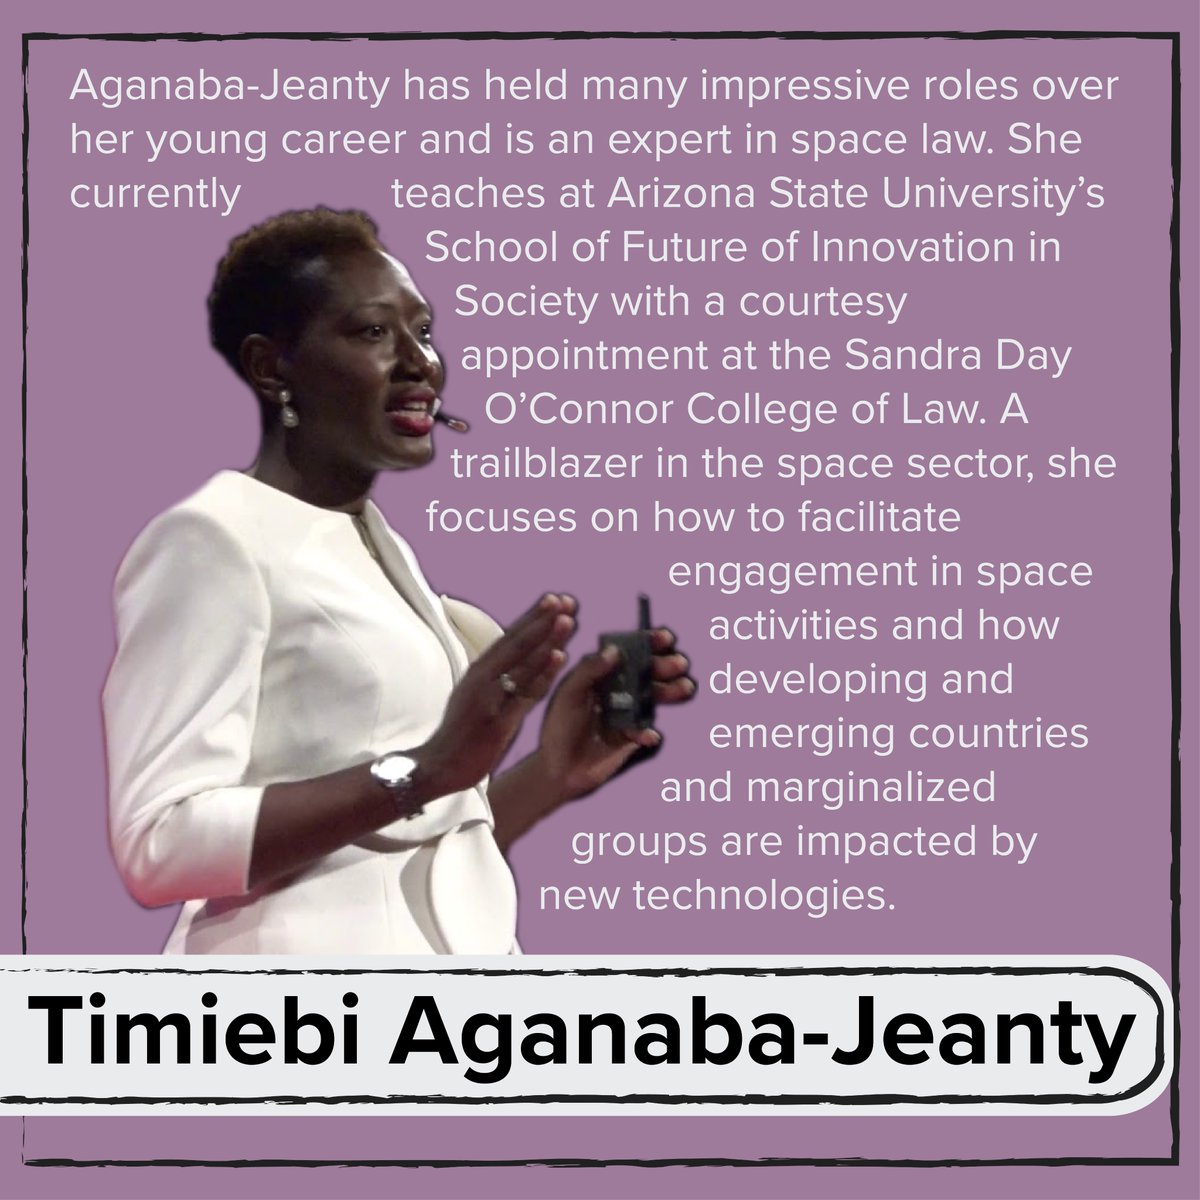  @Timiebi89 is a professor at Arizona State University & an expert in space law. She is a trailblazer in the space sector for emerging space nations and marginalized groups. In fact, our working group was fortunate enough to be able to have her input as a subject matter expert!